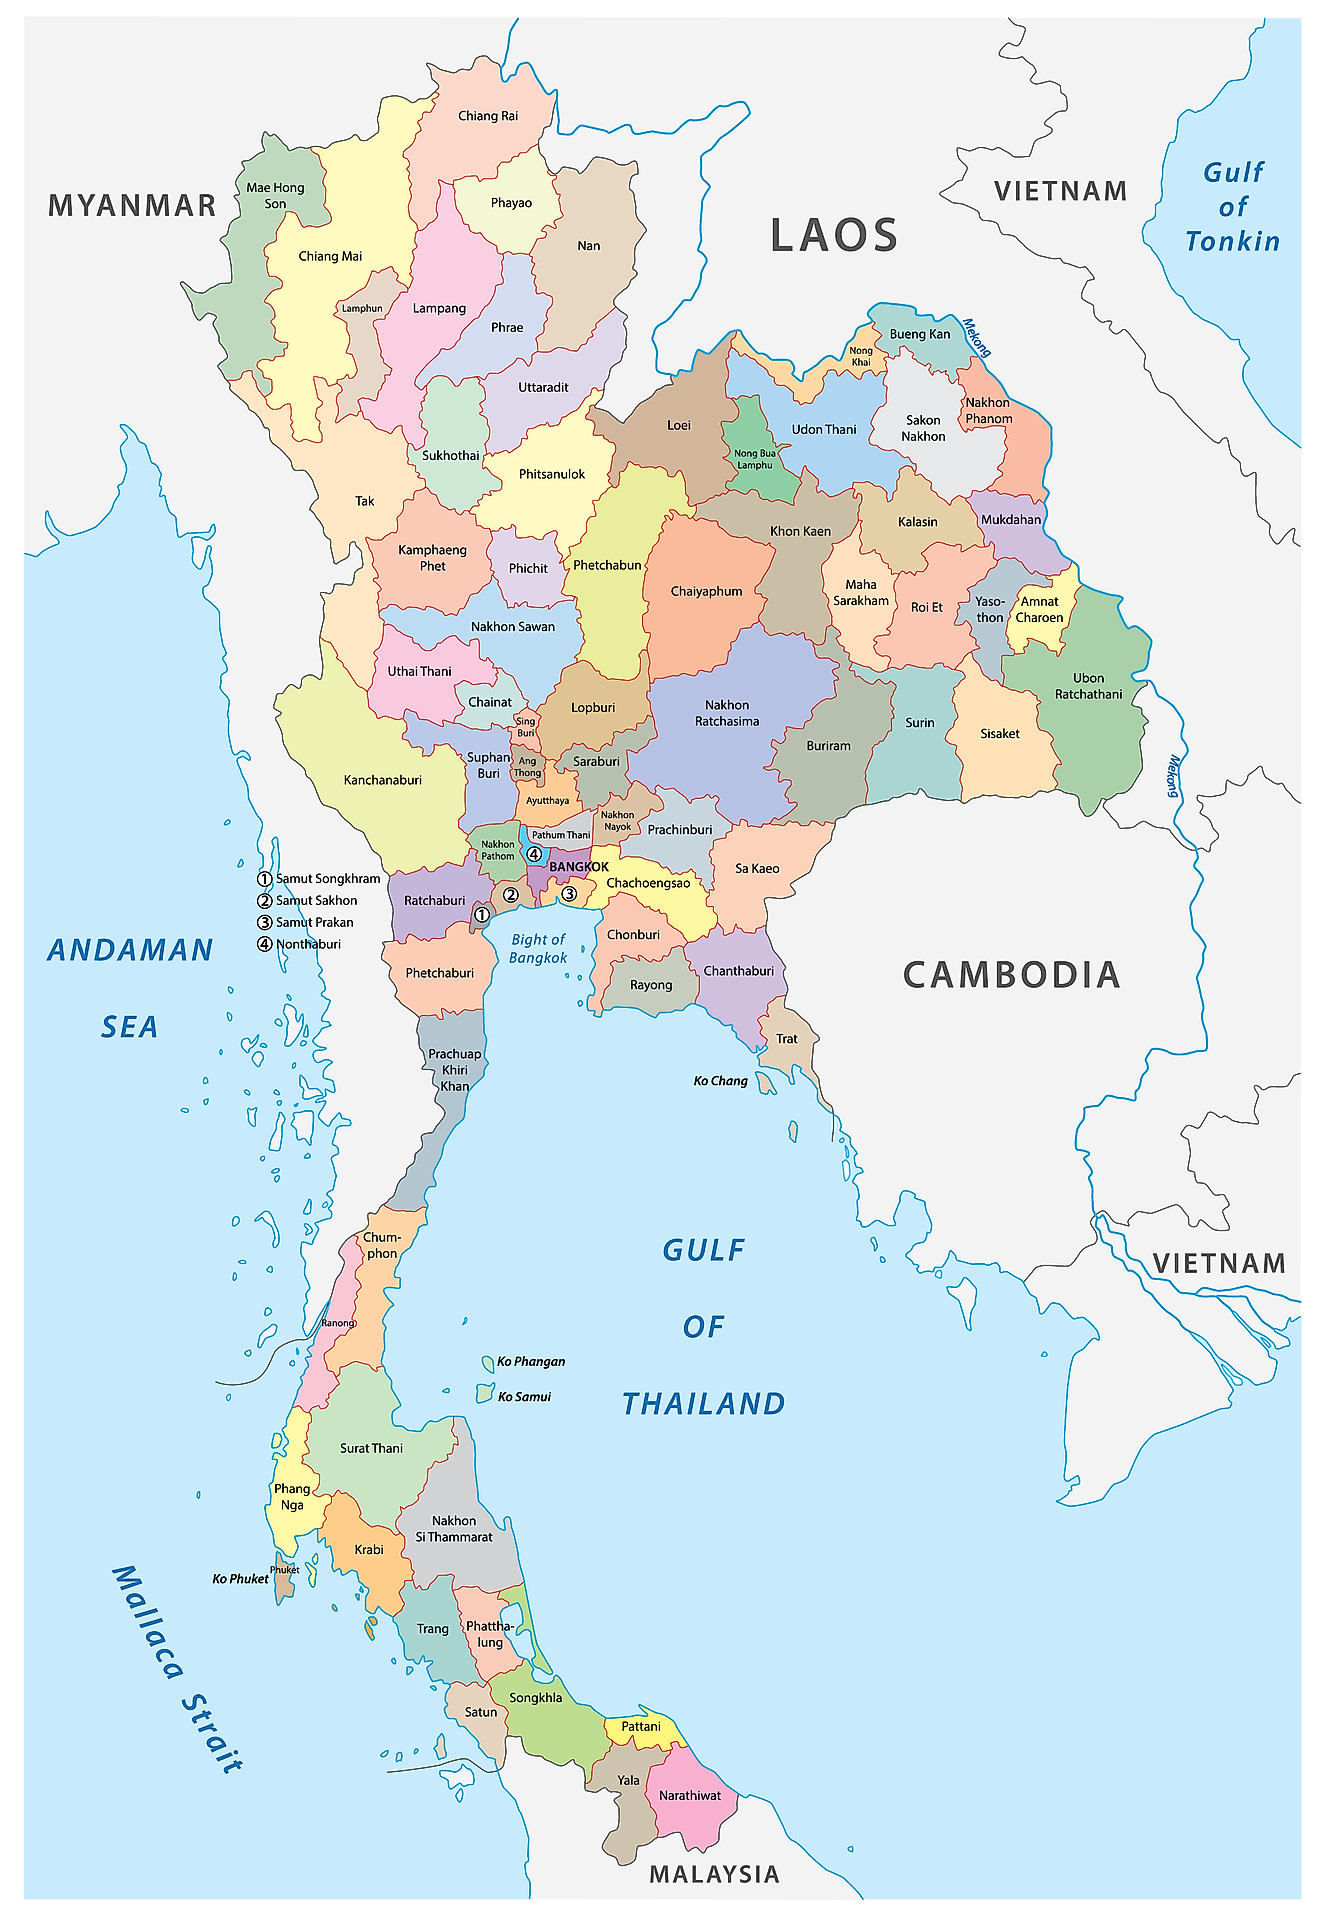 Political Map of Thailand showing the 56 provinces and two specially governed districts including the capital of Bangkok.